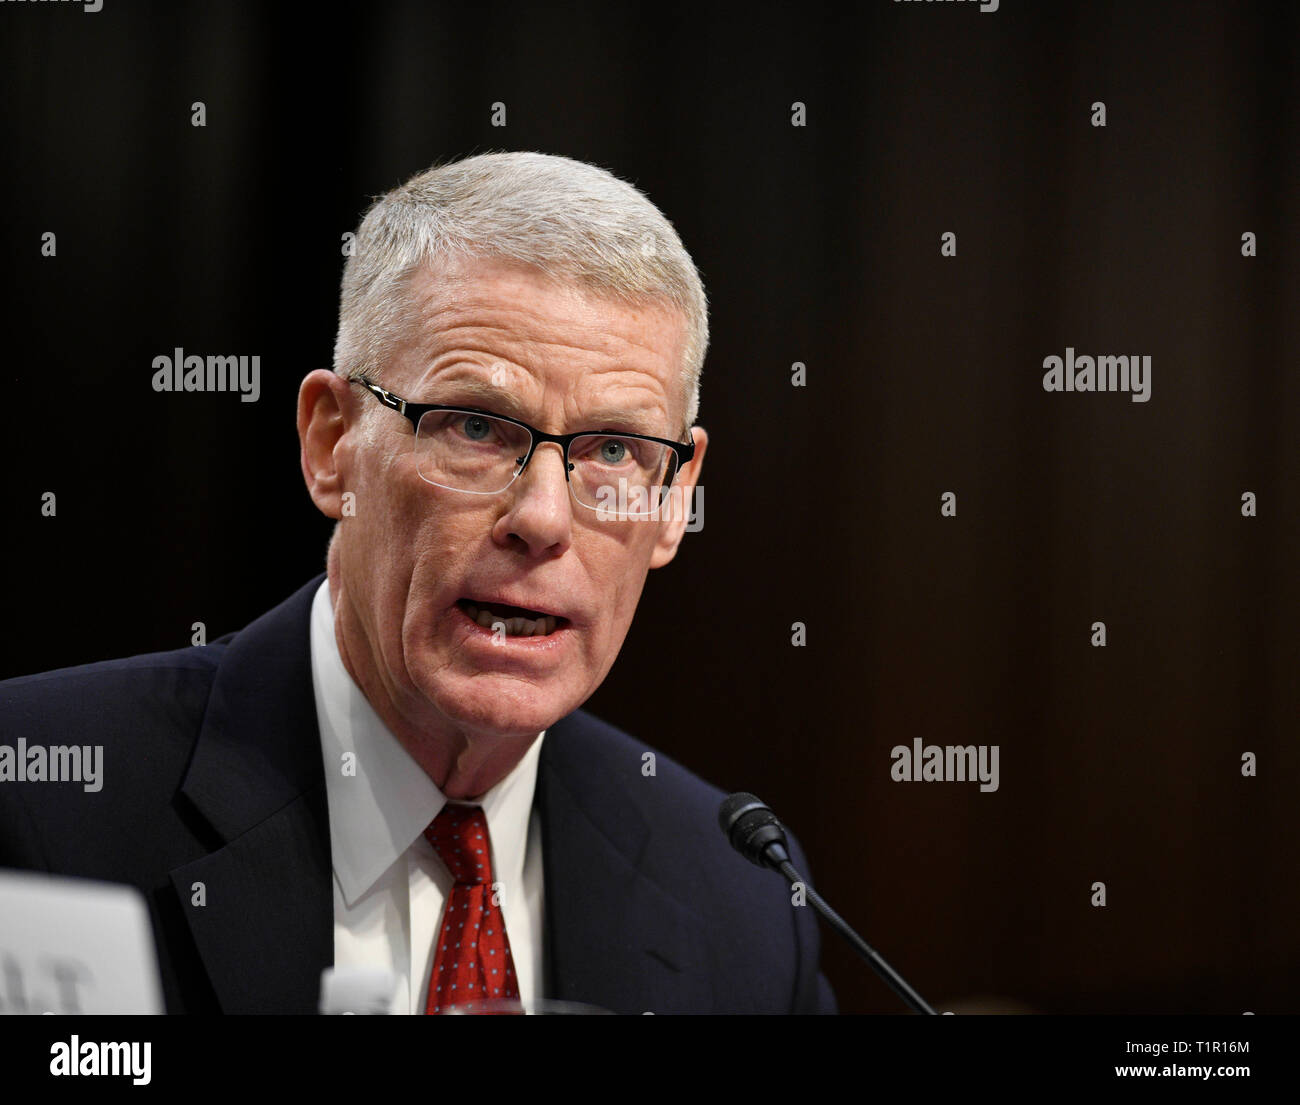 Washington, USA. 27th Mar, 2019. Calvin Scovel, the U.S. Transportation Department's inspector general, speaks at a Senate Commerce Committee hearing on airline safety in Washington, DC, the United States, on March 27, 2019. The U.S. Federal Aviation Administration (FAA) on Wednesday vowed to revamp its air safety oversight after two deadly crashes involving Boeing 737 Max jets in less than five months pointed to possible lapses in the aircraft approval process. Credit: Liu Jie/Xinhua/Alamy Live News Stock Photo